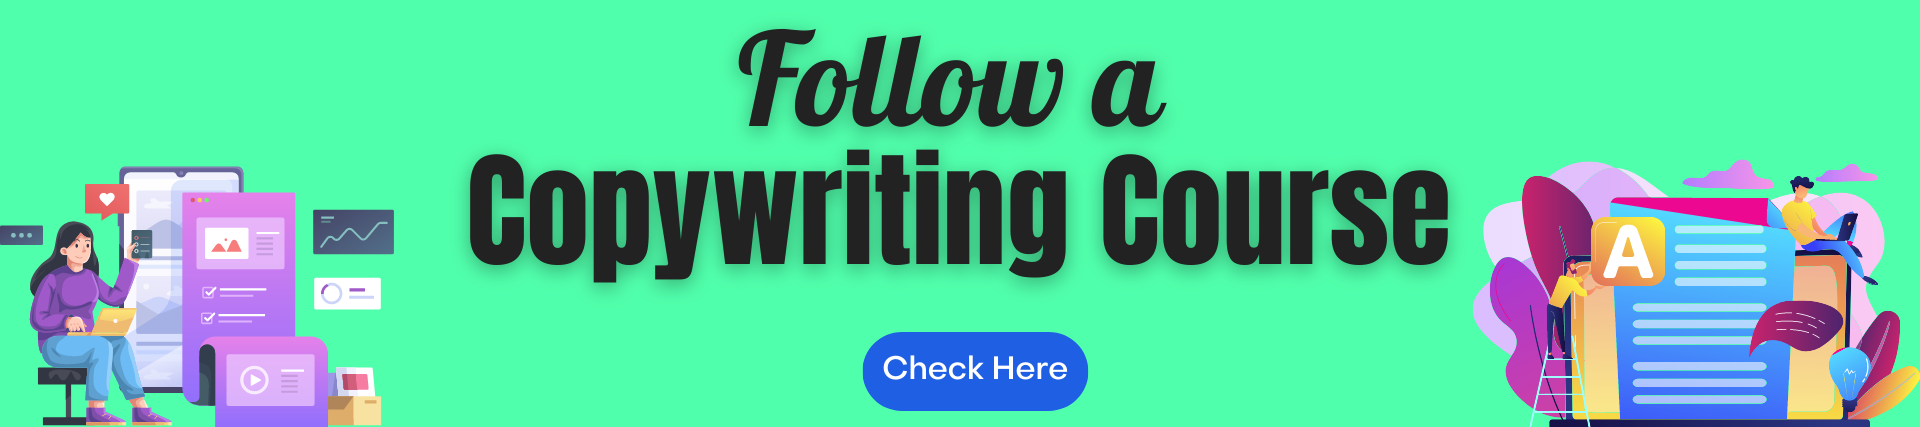 10 Best Practices for Website Copywriting 